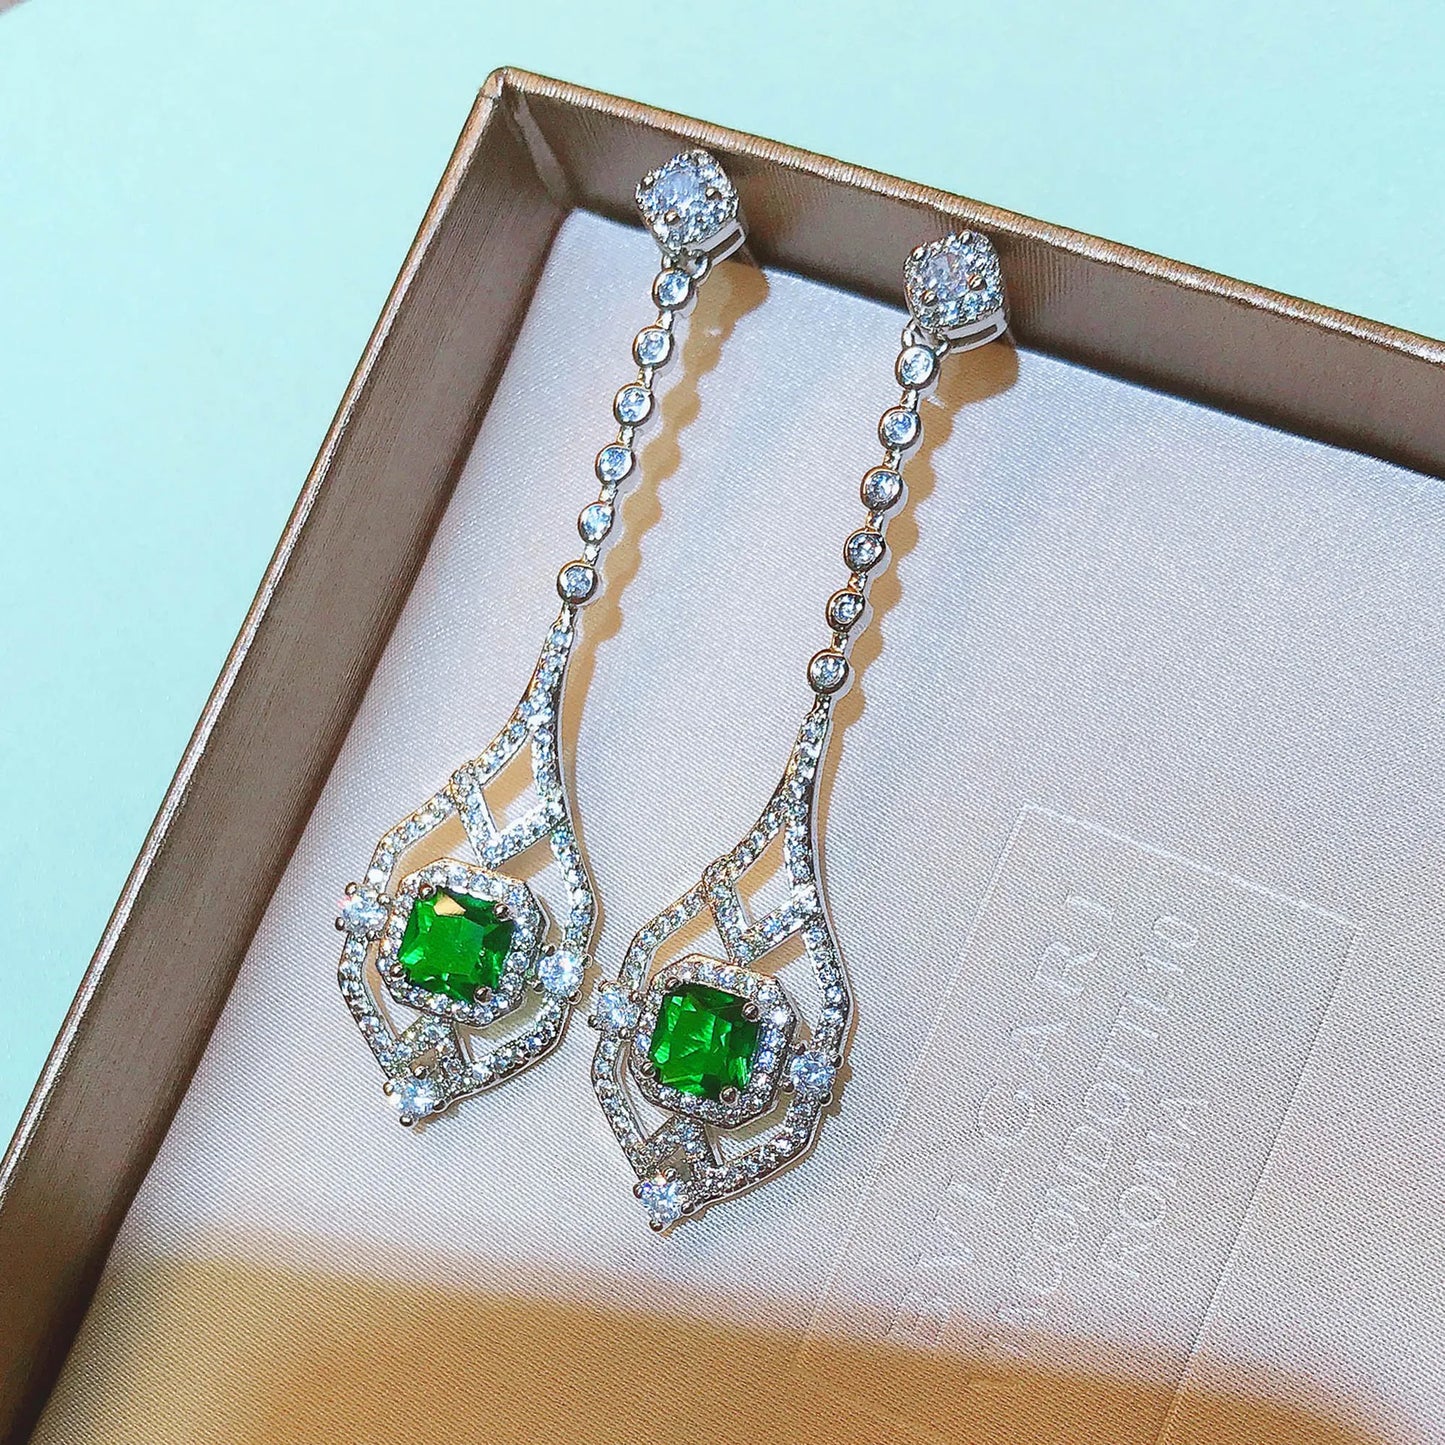 RUZZALLATI 2022 New Vintage Antique Lab Emerald Jewelry  Silver Color Hollow Design Long Drop Earring for Women Dangler Gift